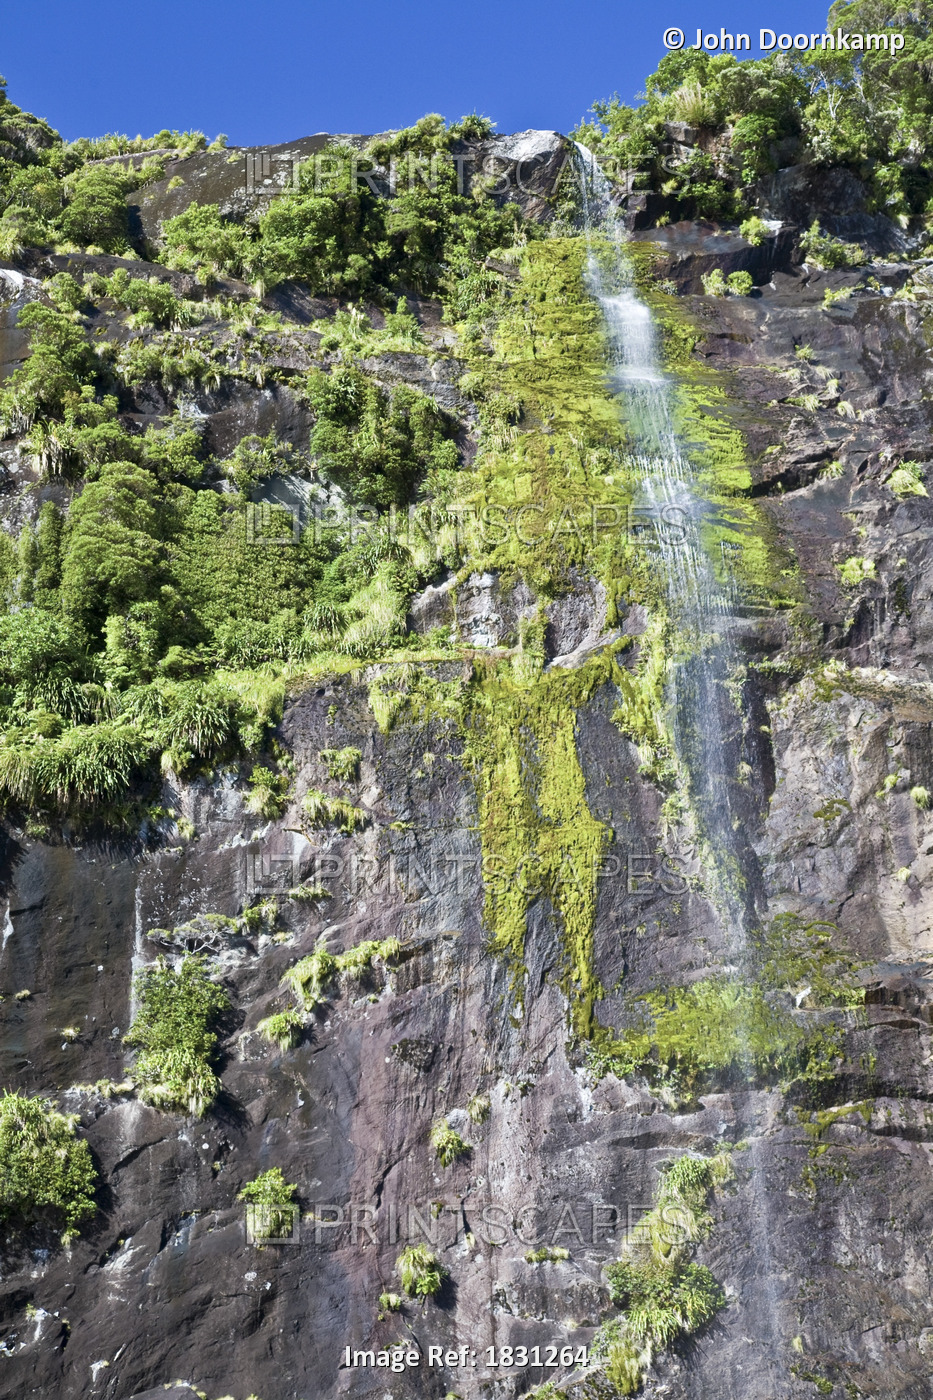 WATERFALL IN MILFORD SOUND, NEW ZEALAND 3